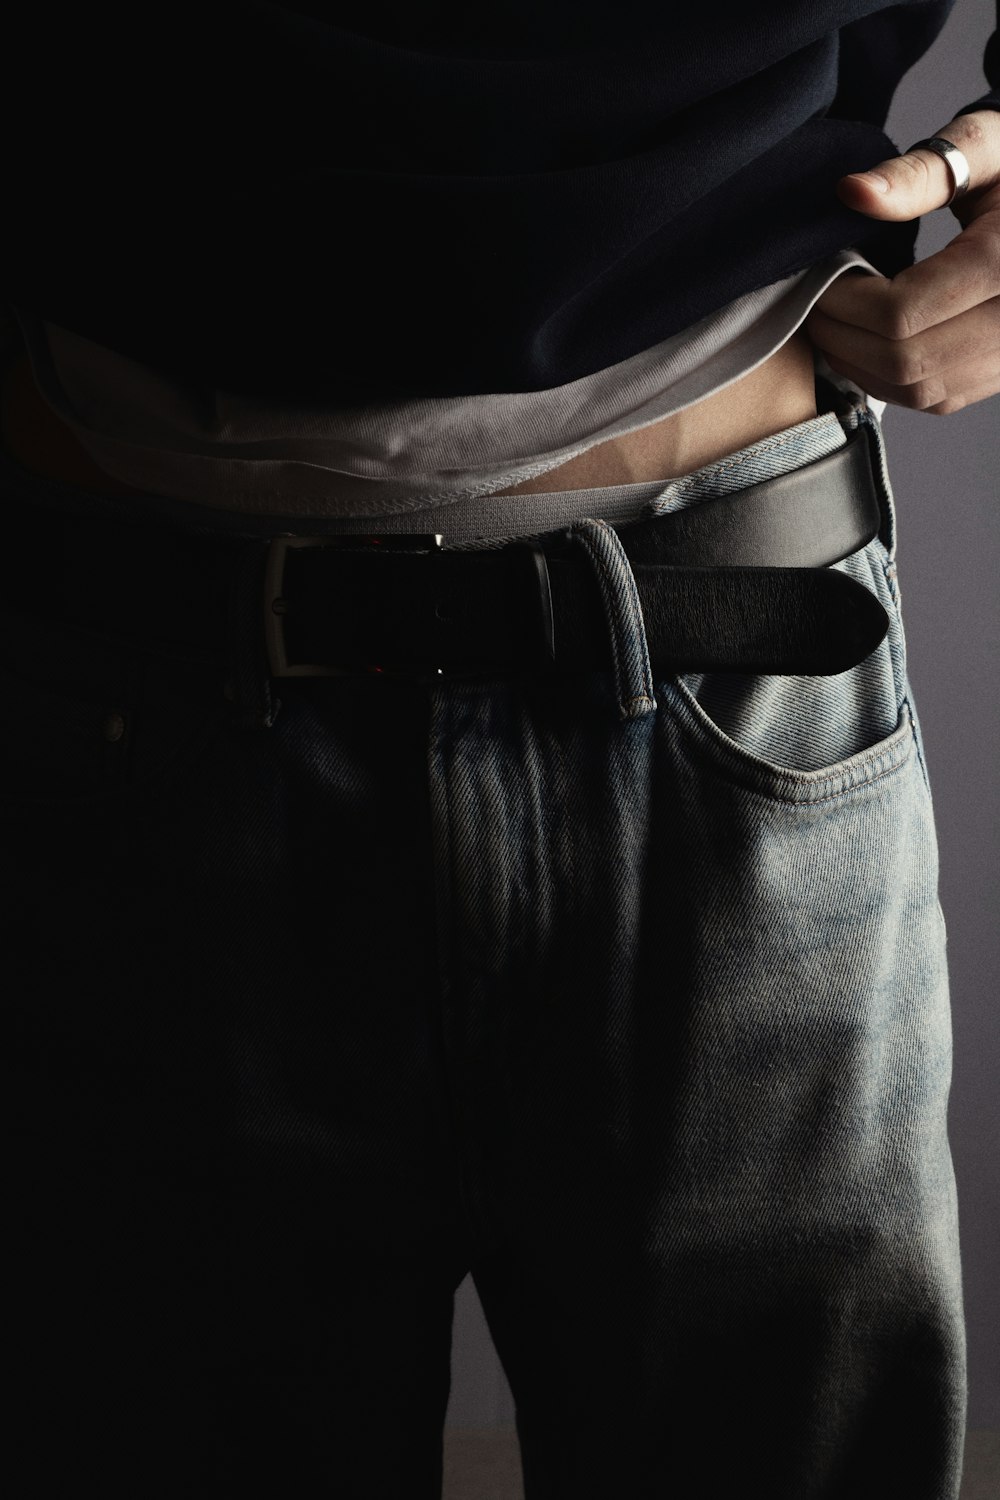 a man is wearing a belt and jeans